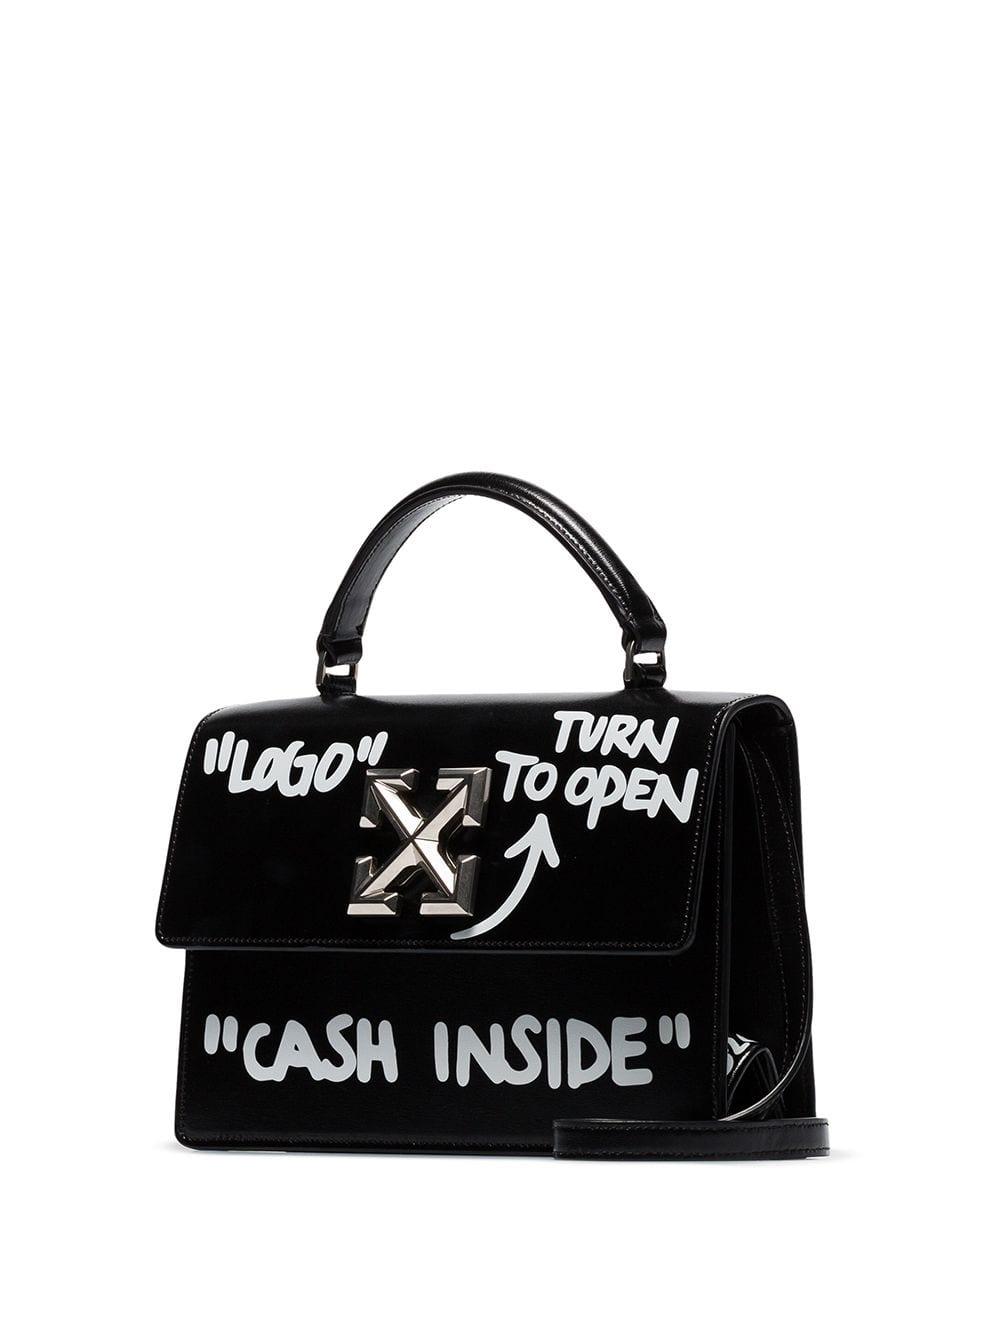 Off-White Cash Inside Logo Printed Wallet – Cettire